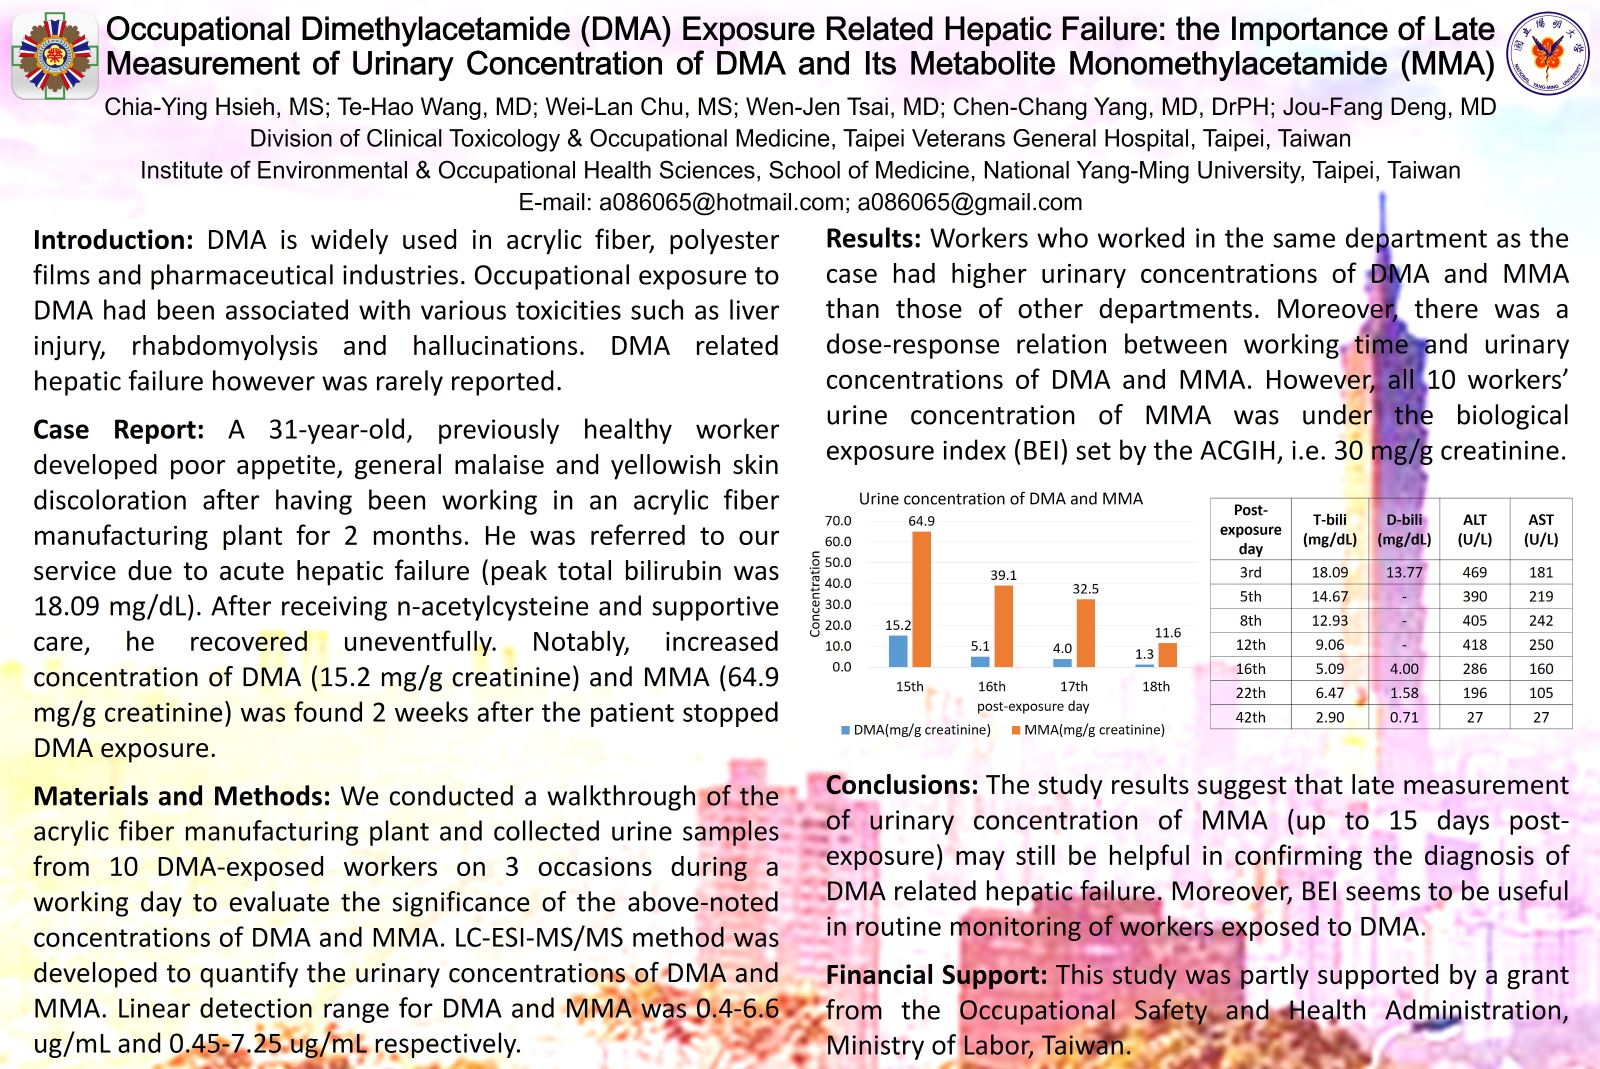 Occupational dimethylacetamide (DMA) exposure related hepatic failure: the importance of late measurement of  urinary concentration of DMA and its metabolite Monomethylacetamide (MMA)